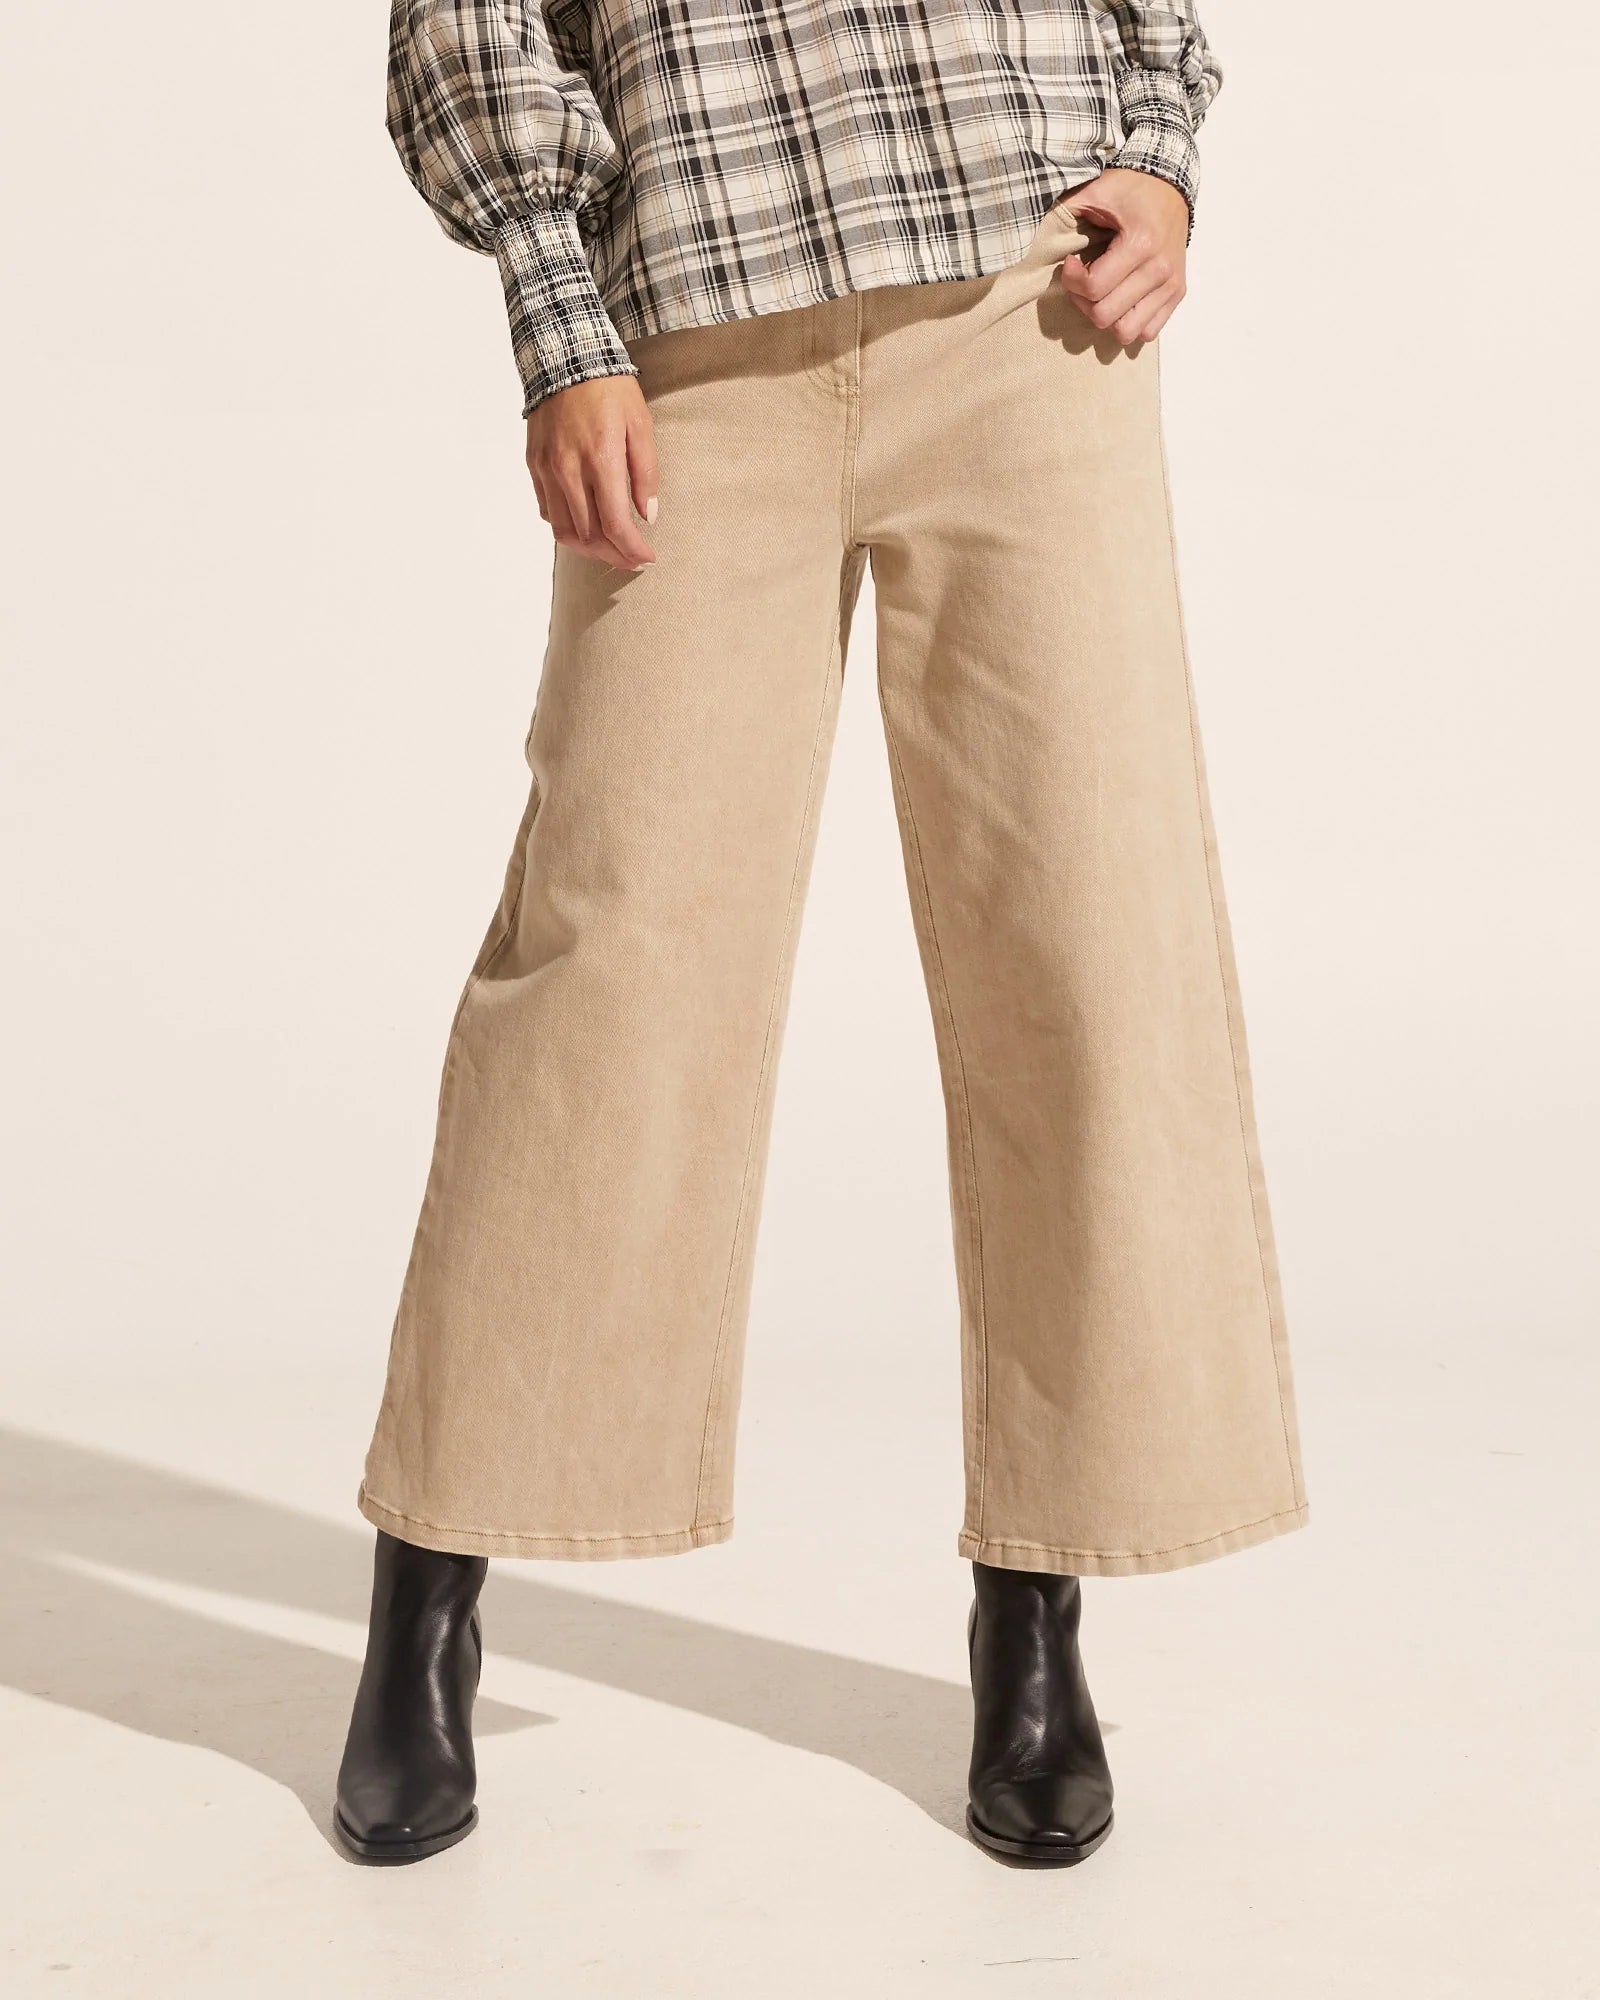 Oatmeal in colour are these on trend wide leg denim pants from Zoe Kratzmann